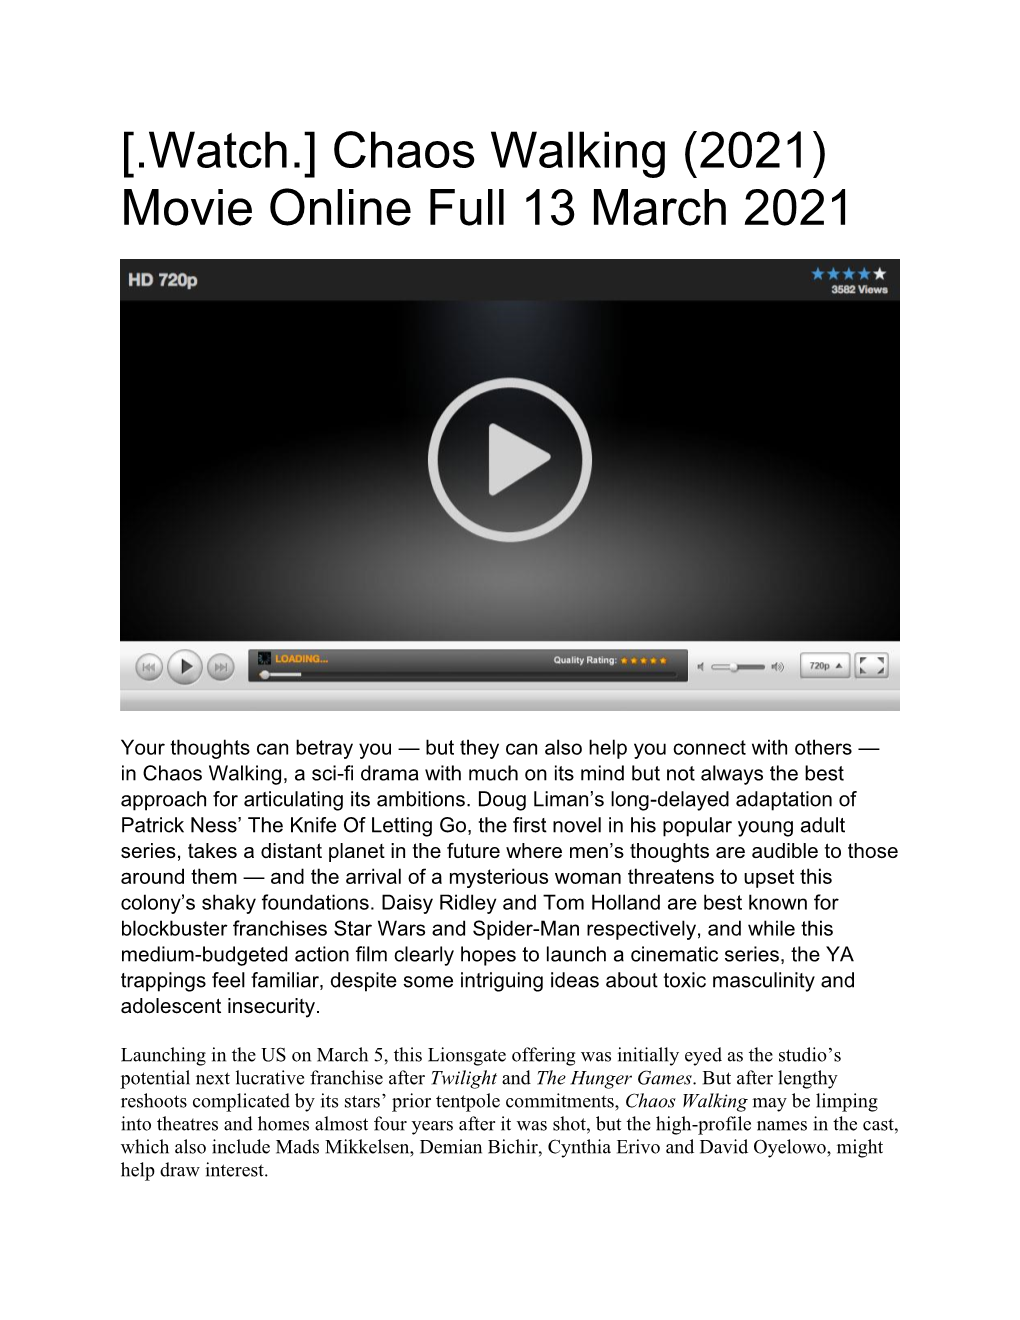 [.Watch.] Chaos Walking (2021) Movie Online Full 13 March 2021